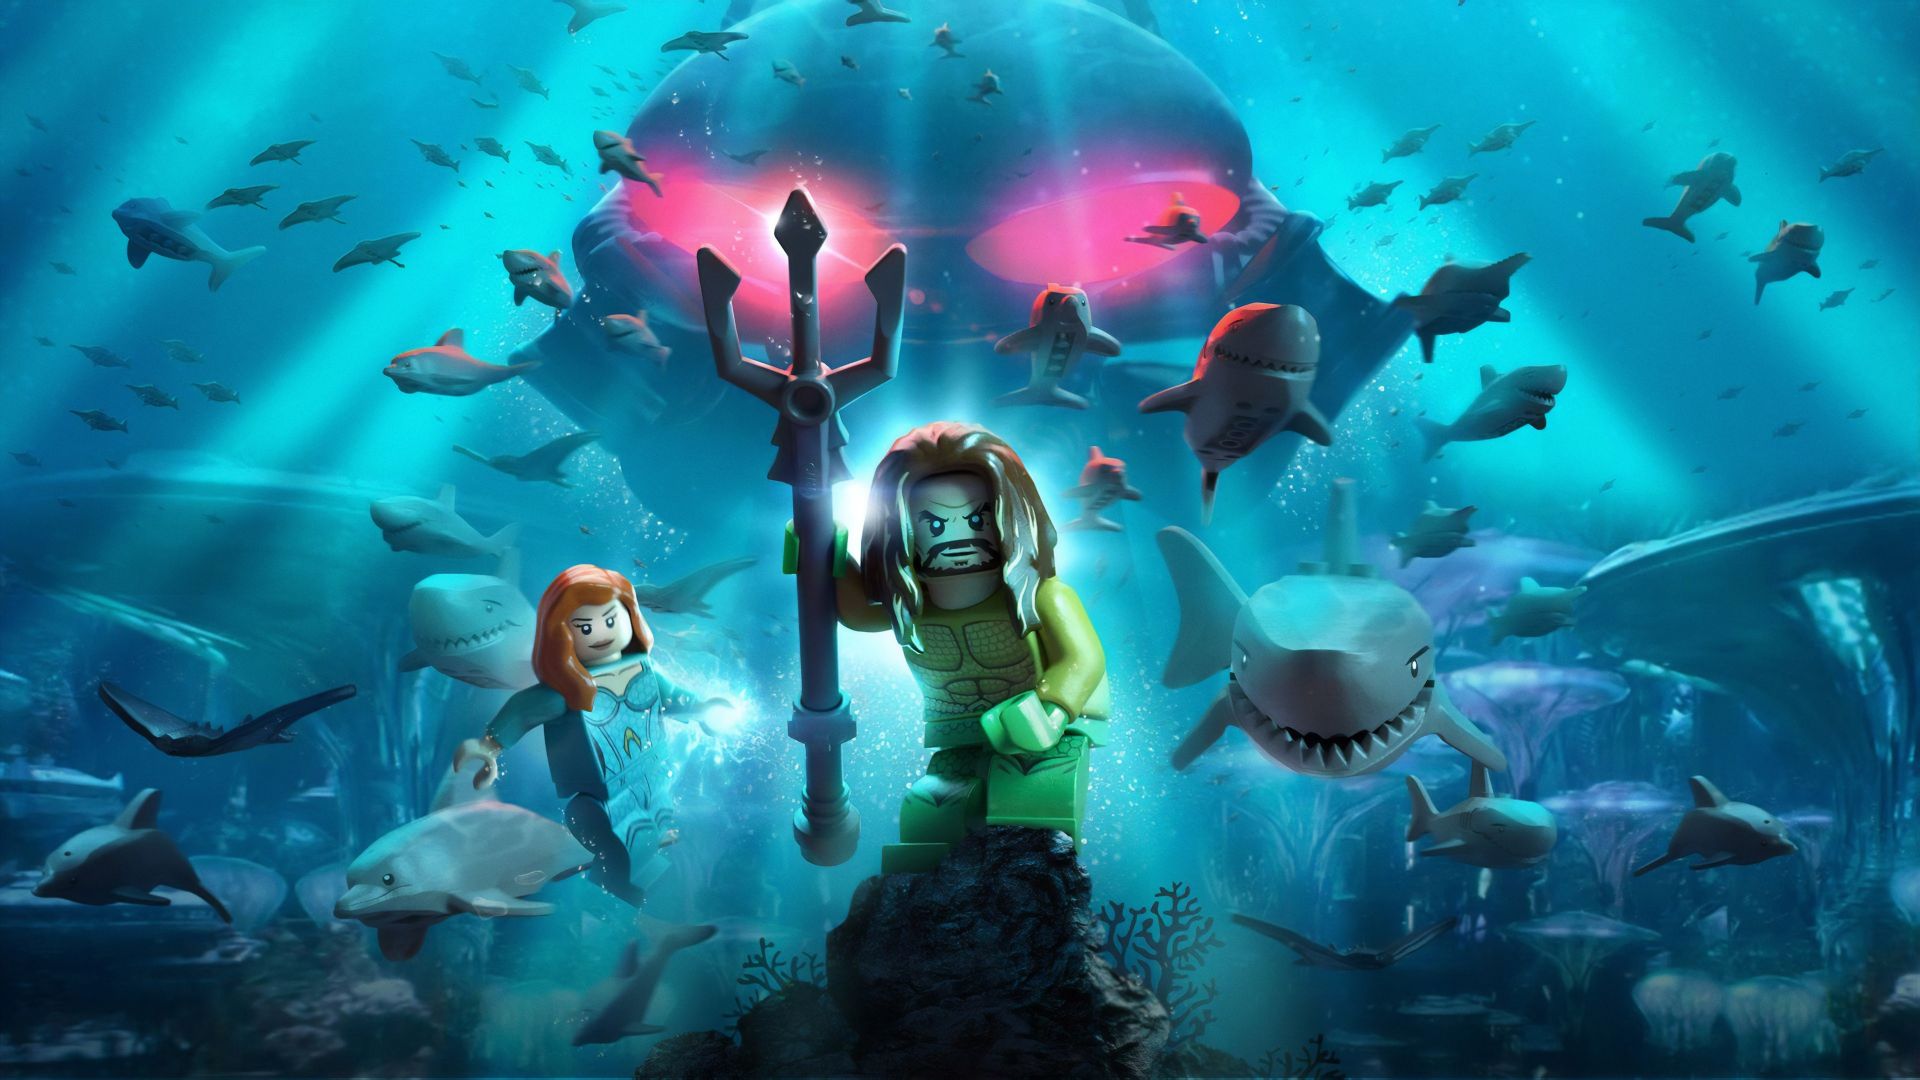 Lego, aquaman, poster, movie, 2018 wallpaper, HD image, picture, background, 732bb4